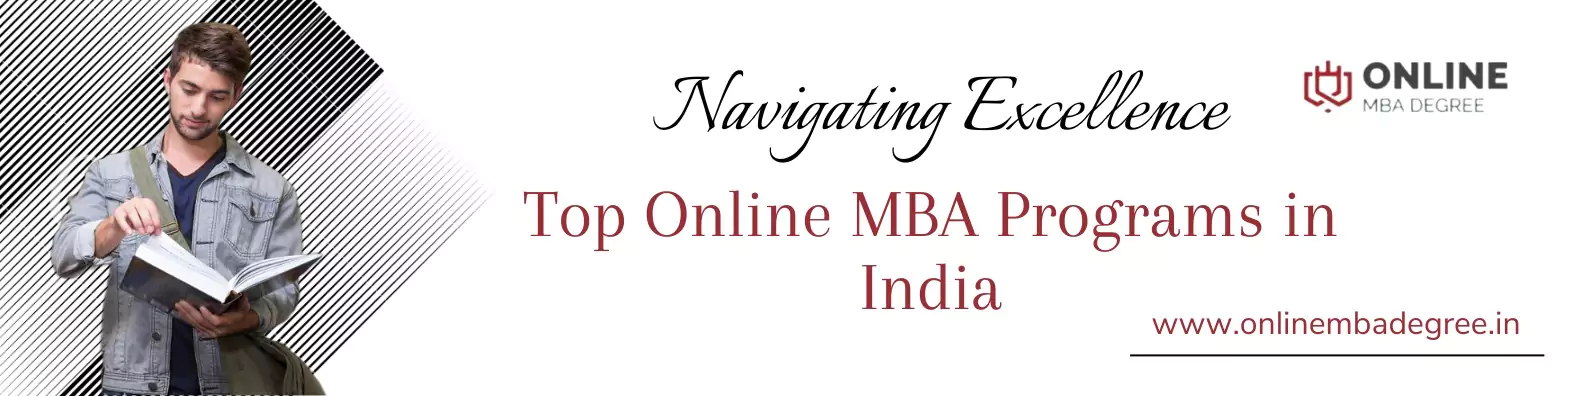 Navigating Excellence Top Online MBA in India